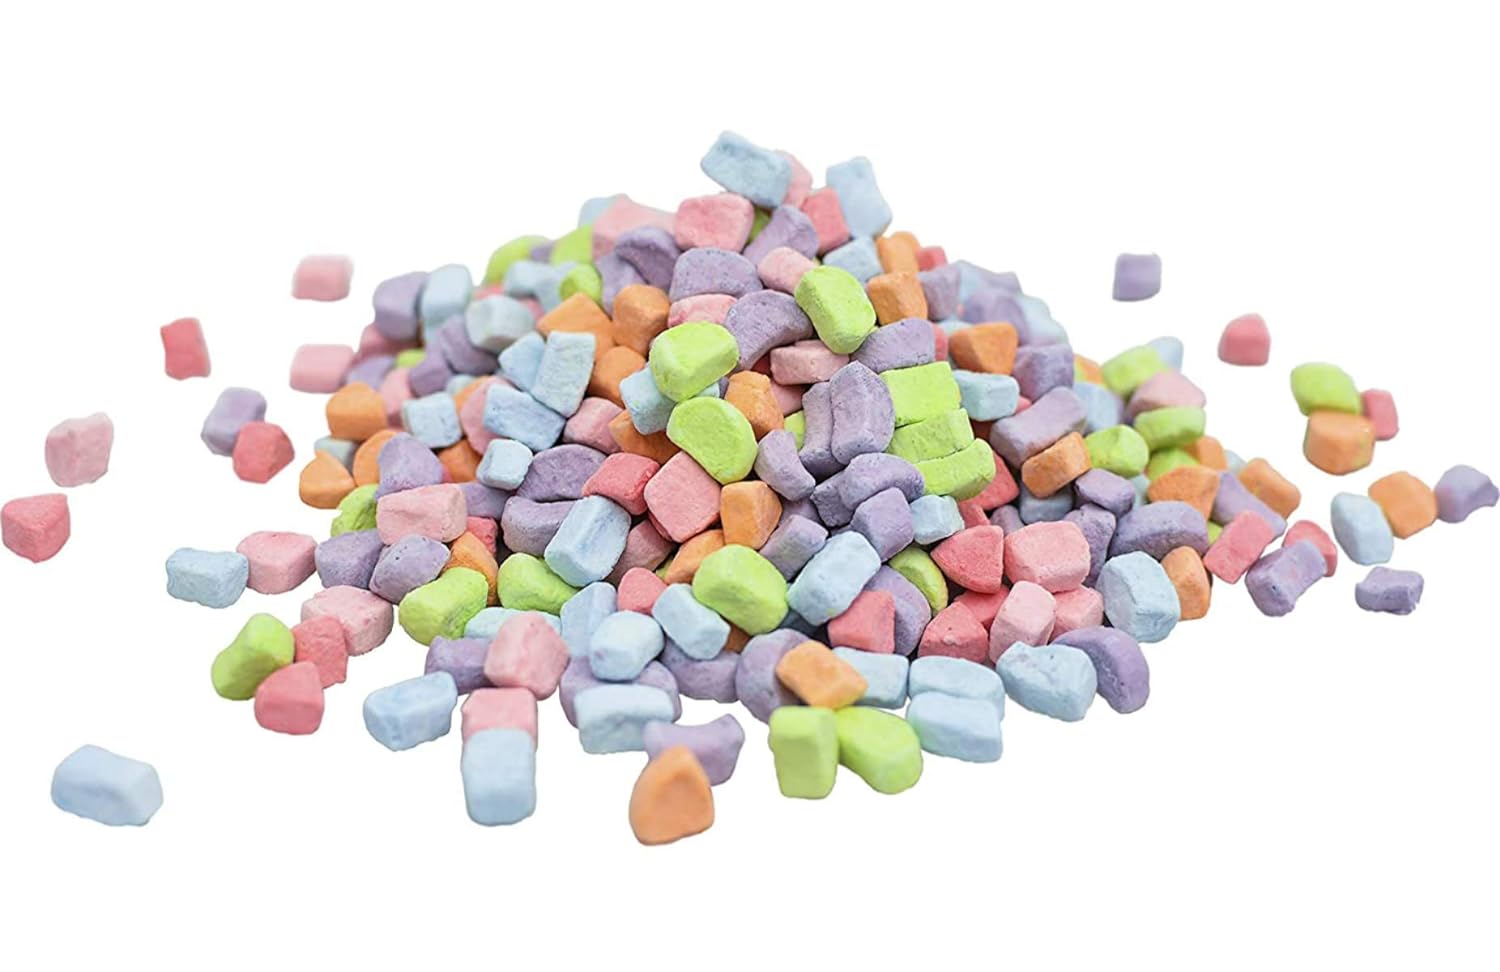 By The Cup Assorted Dehydrated Cereal Marshmallow Bits 3 lb bulk bag : Grocery & Gourmet Food